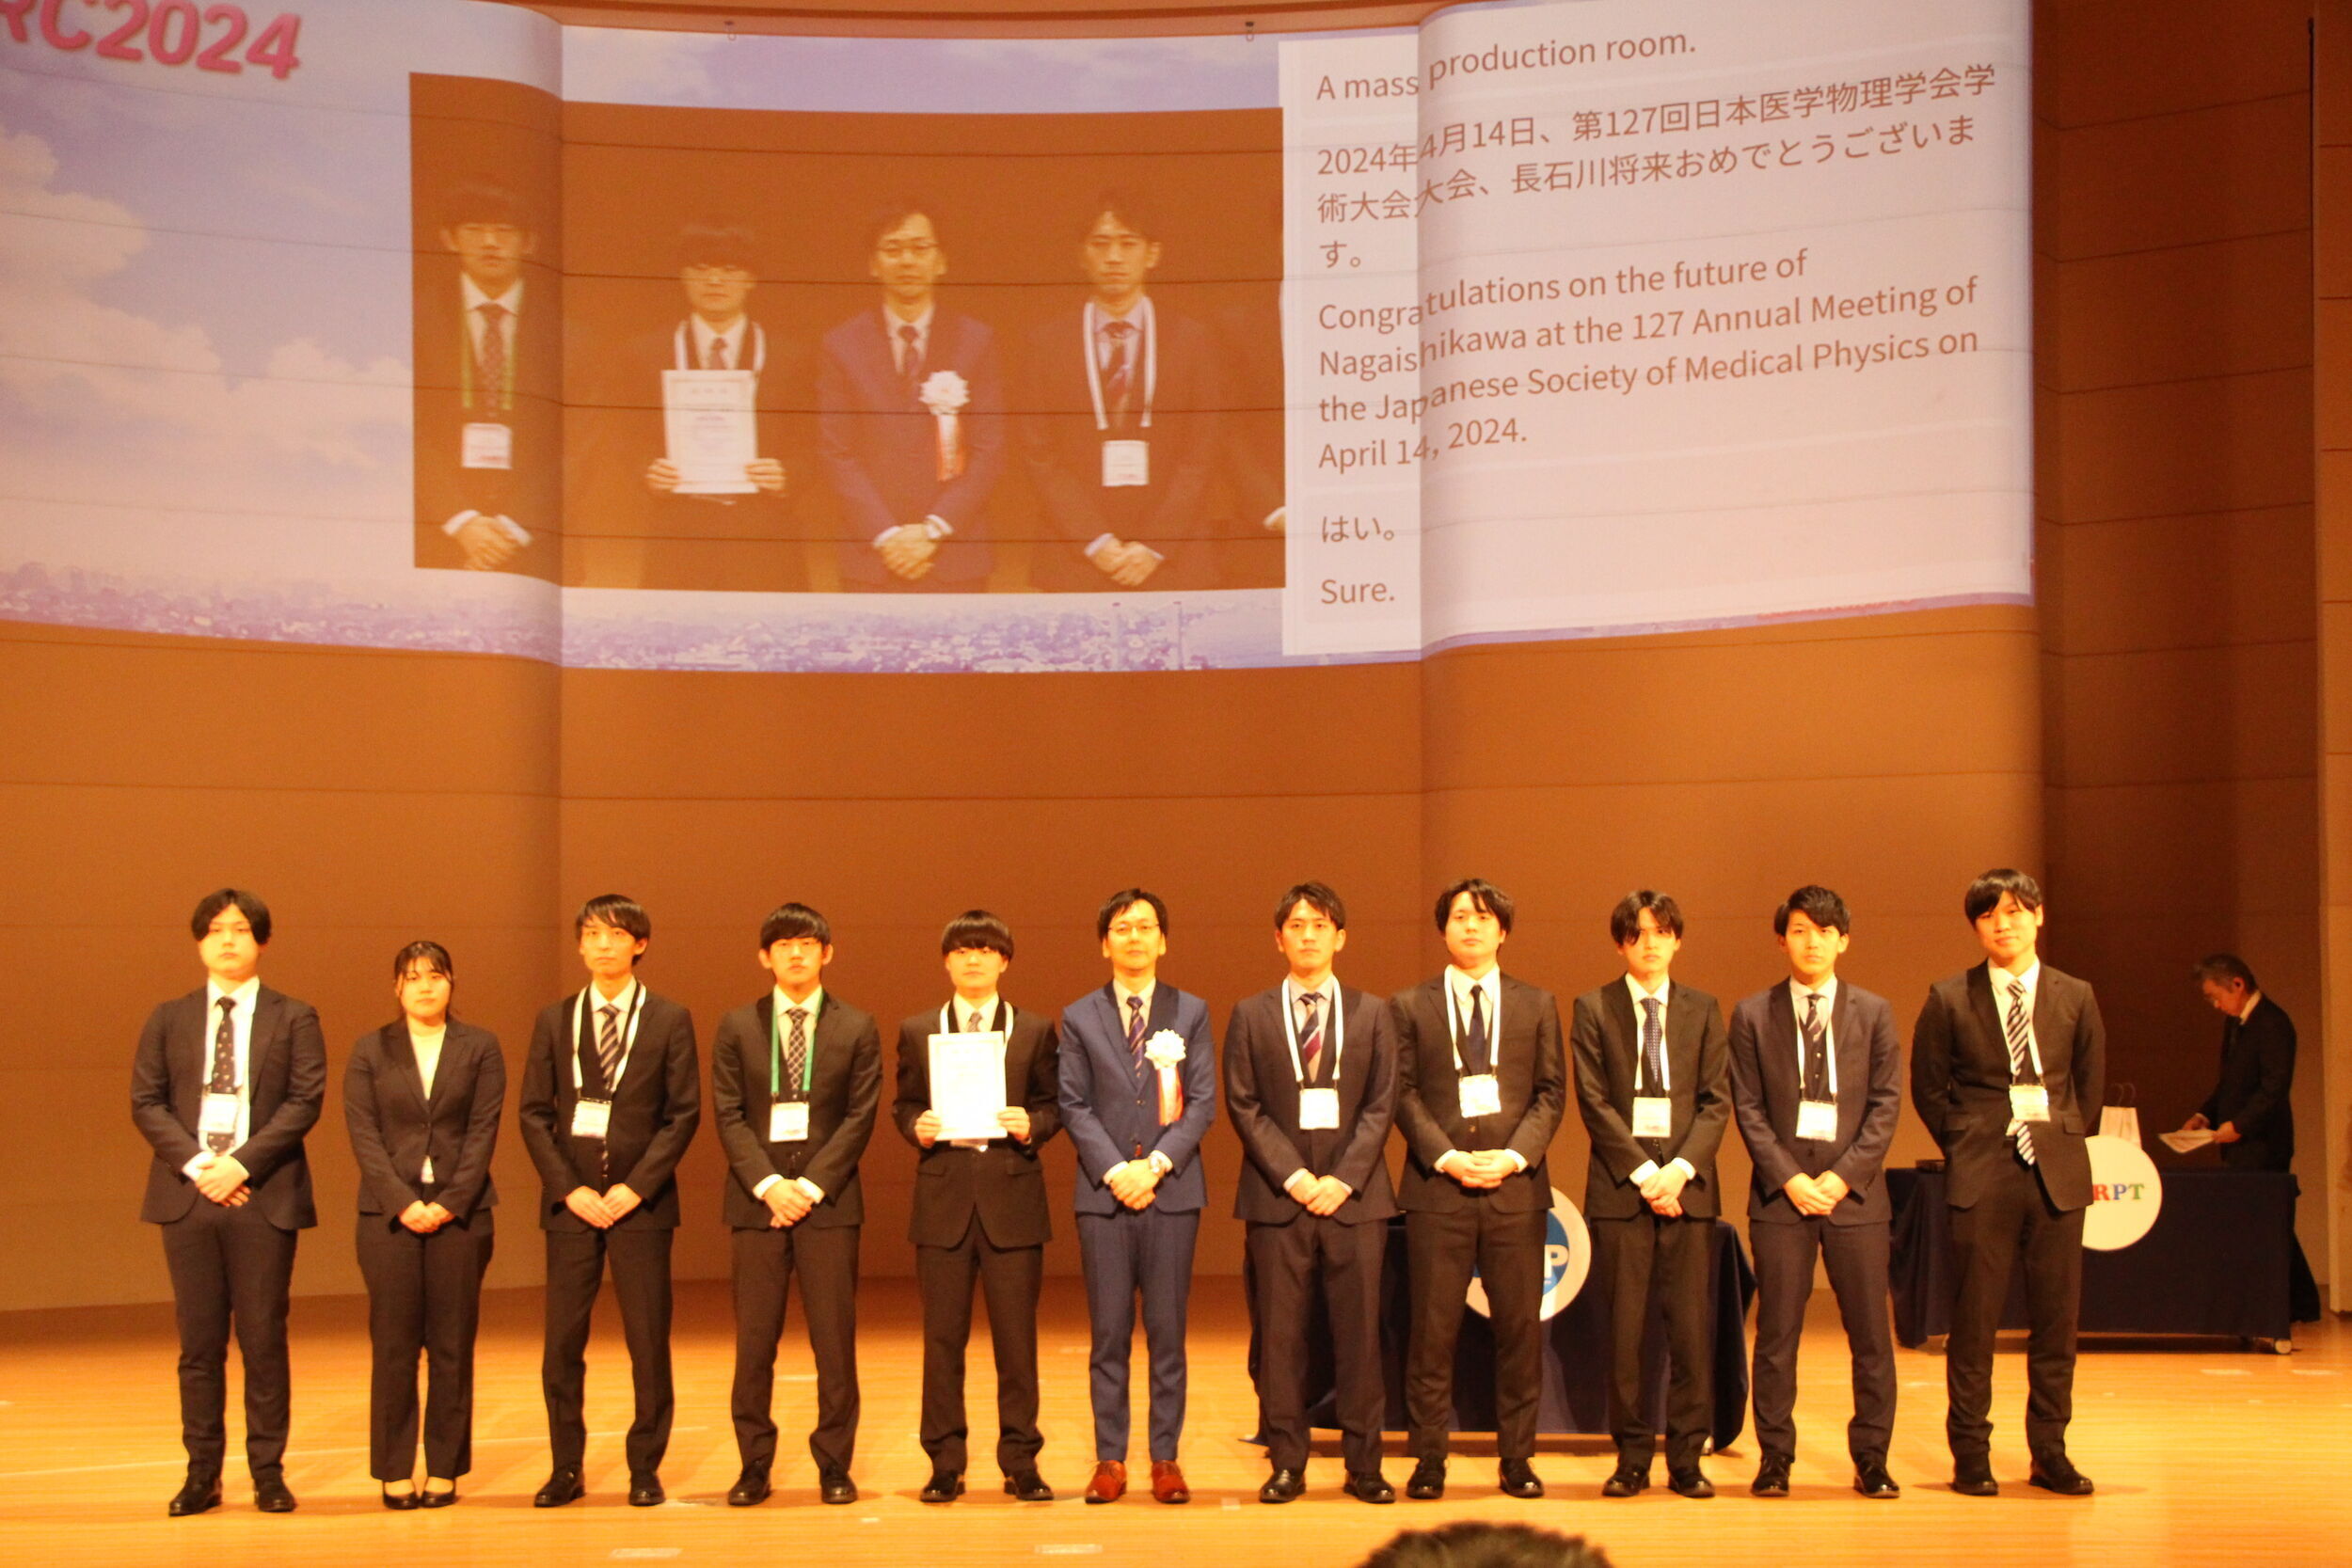 Tohoku University, a joint research facility: Three students received the Student Encouragement Award at the 127th Annual Meeting of the Japan Society of Medical Physics!